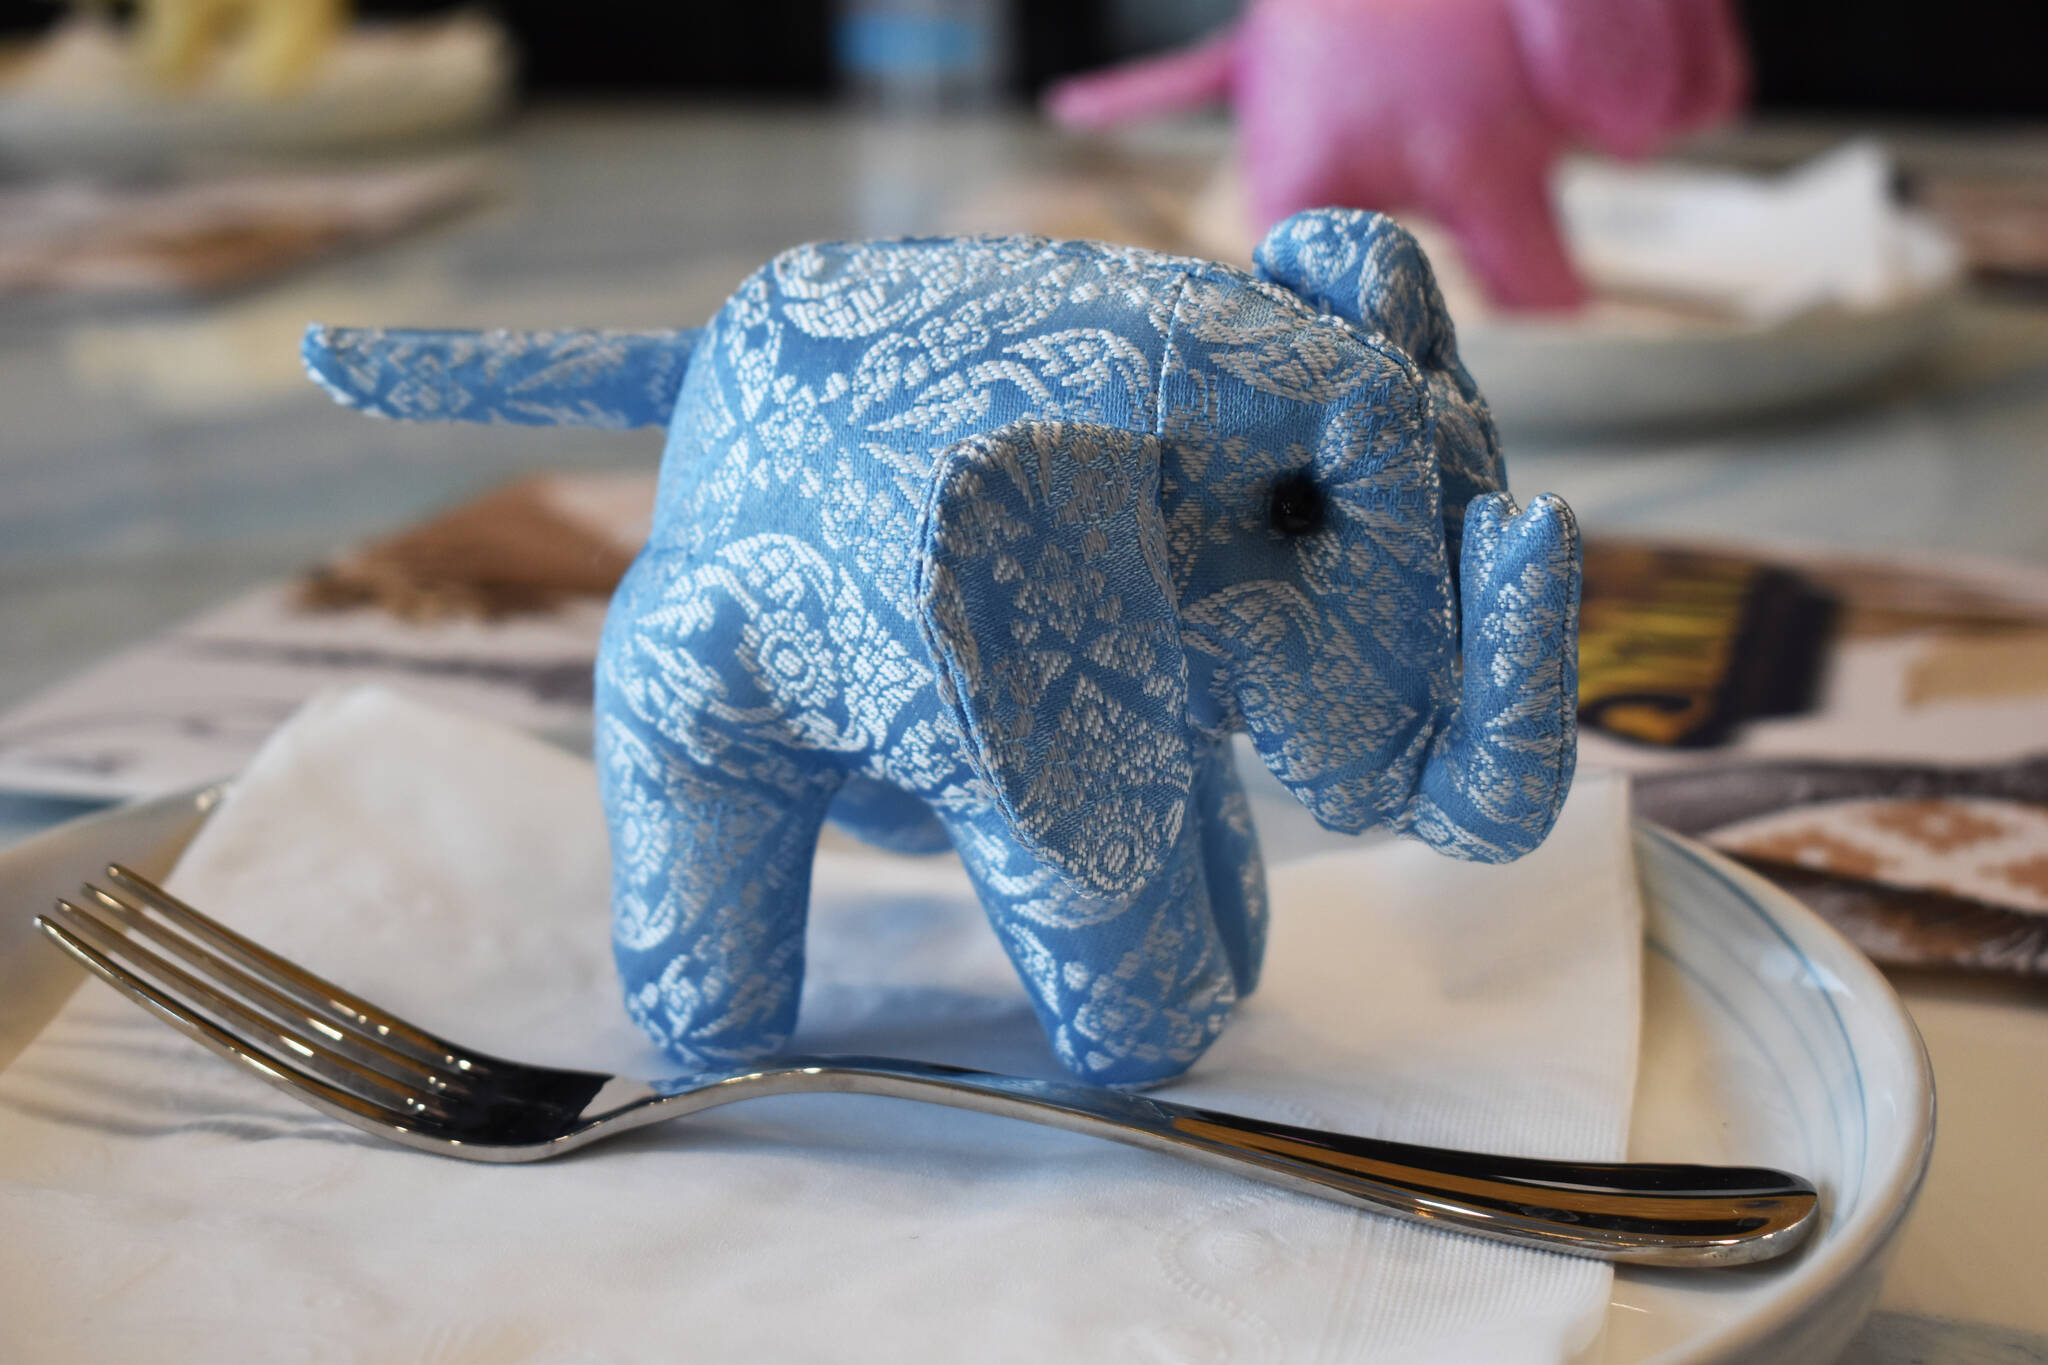 A small elephant sits on a plate with a fork at Siam Noodles and Food in Soldotna, Alaska, on Friday, April 7, 2023. (Jake Dye/Peninsula Clarion)